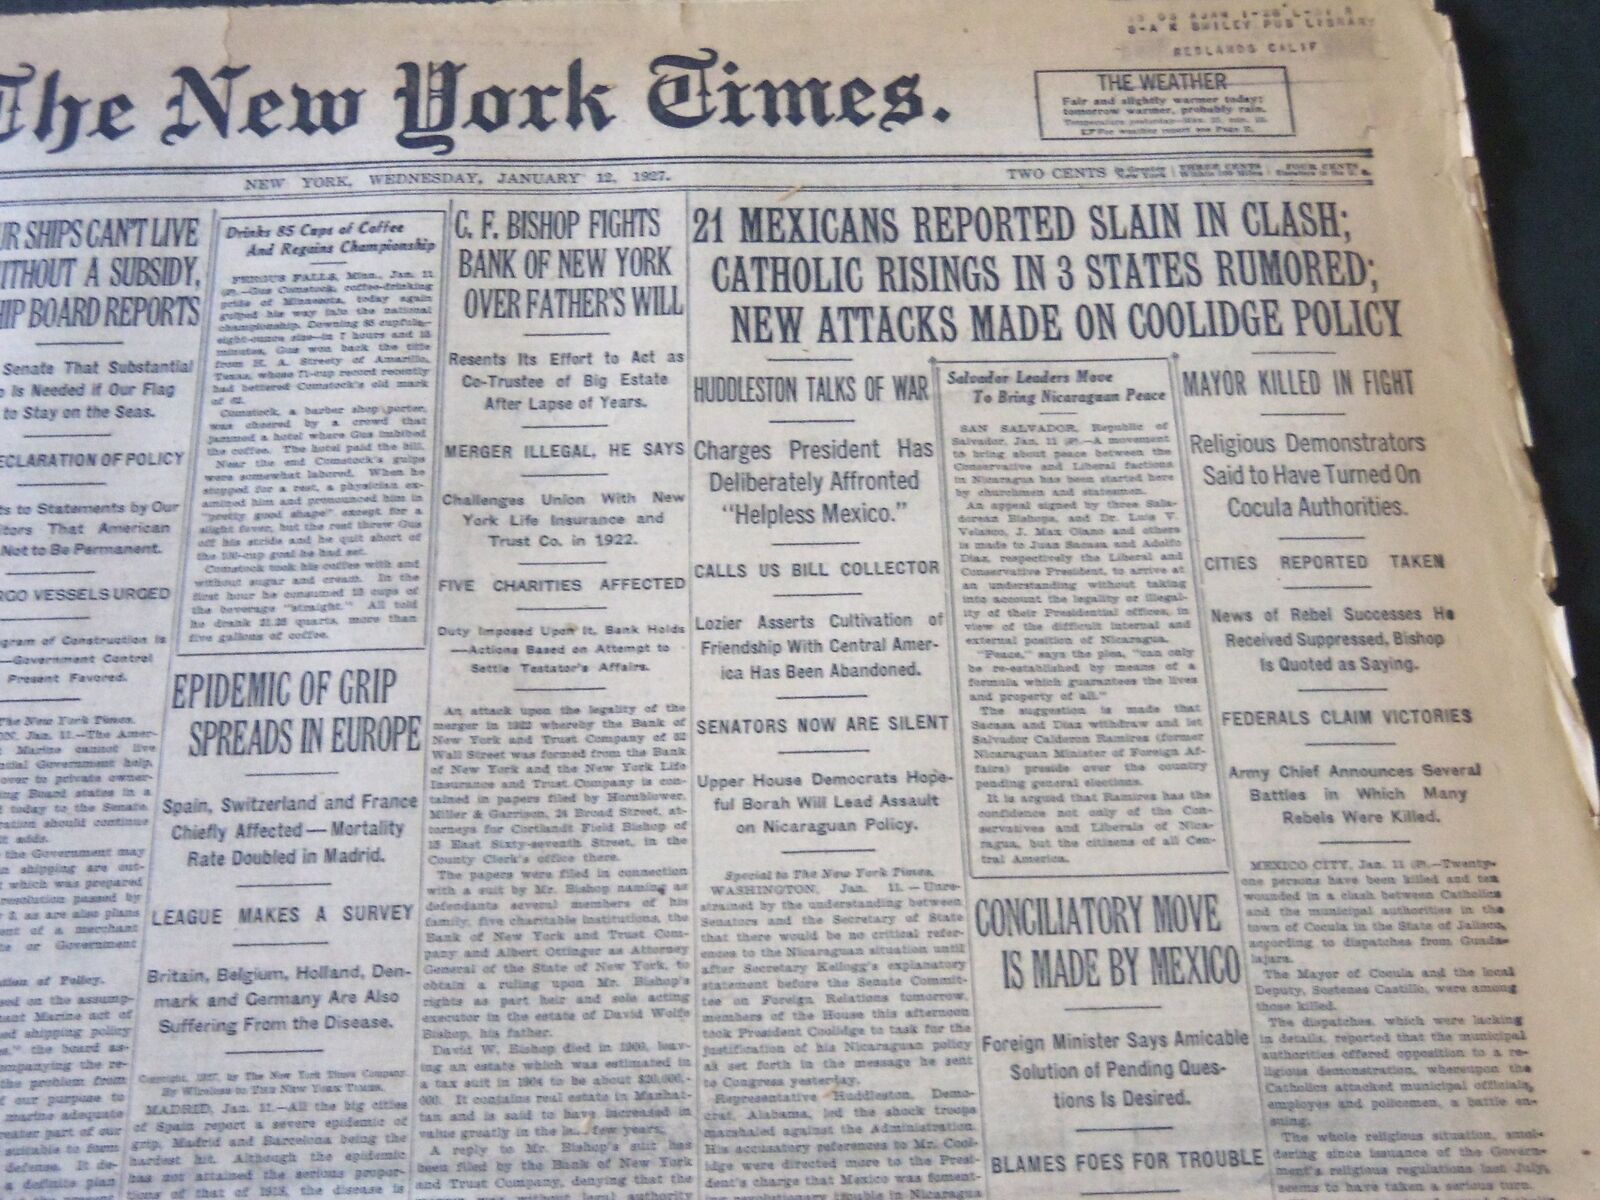 1927 JANUARY 12 NEW YORK TIMES - 21 MEXICANS REPORTED SLAIN IN CLASH - NT 6387